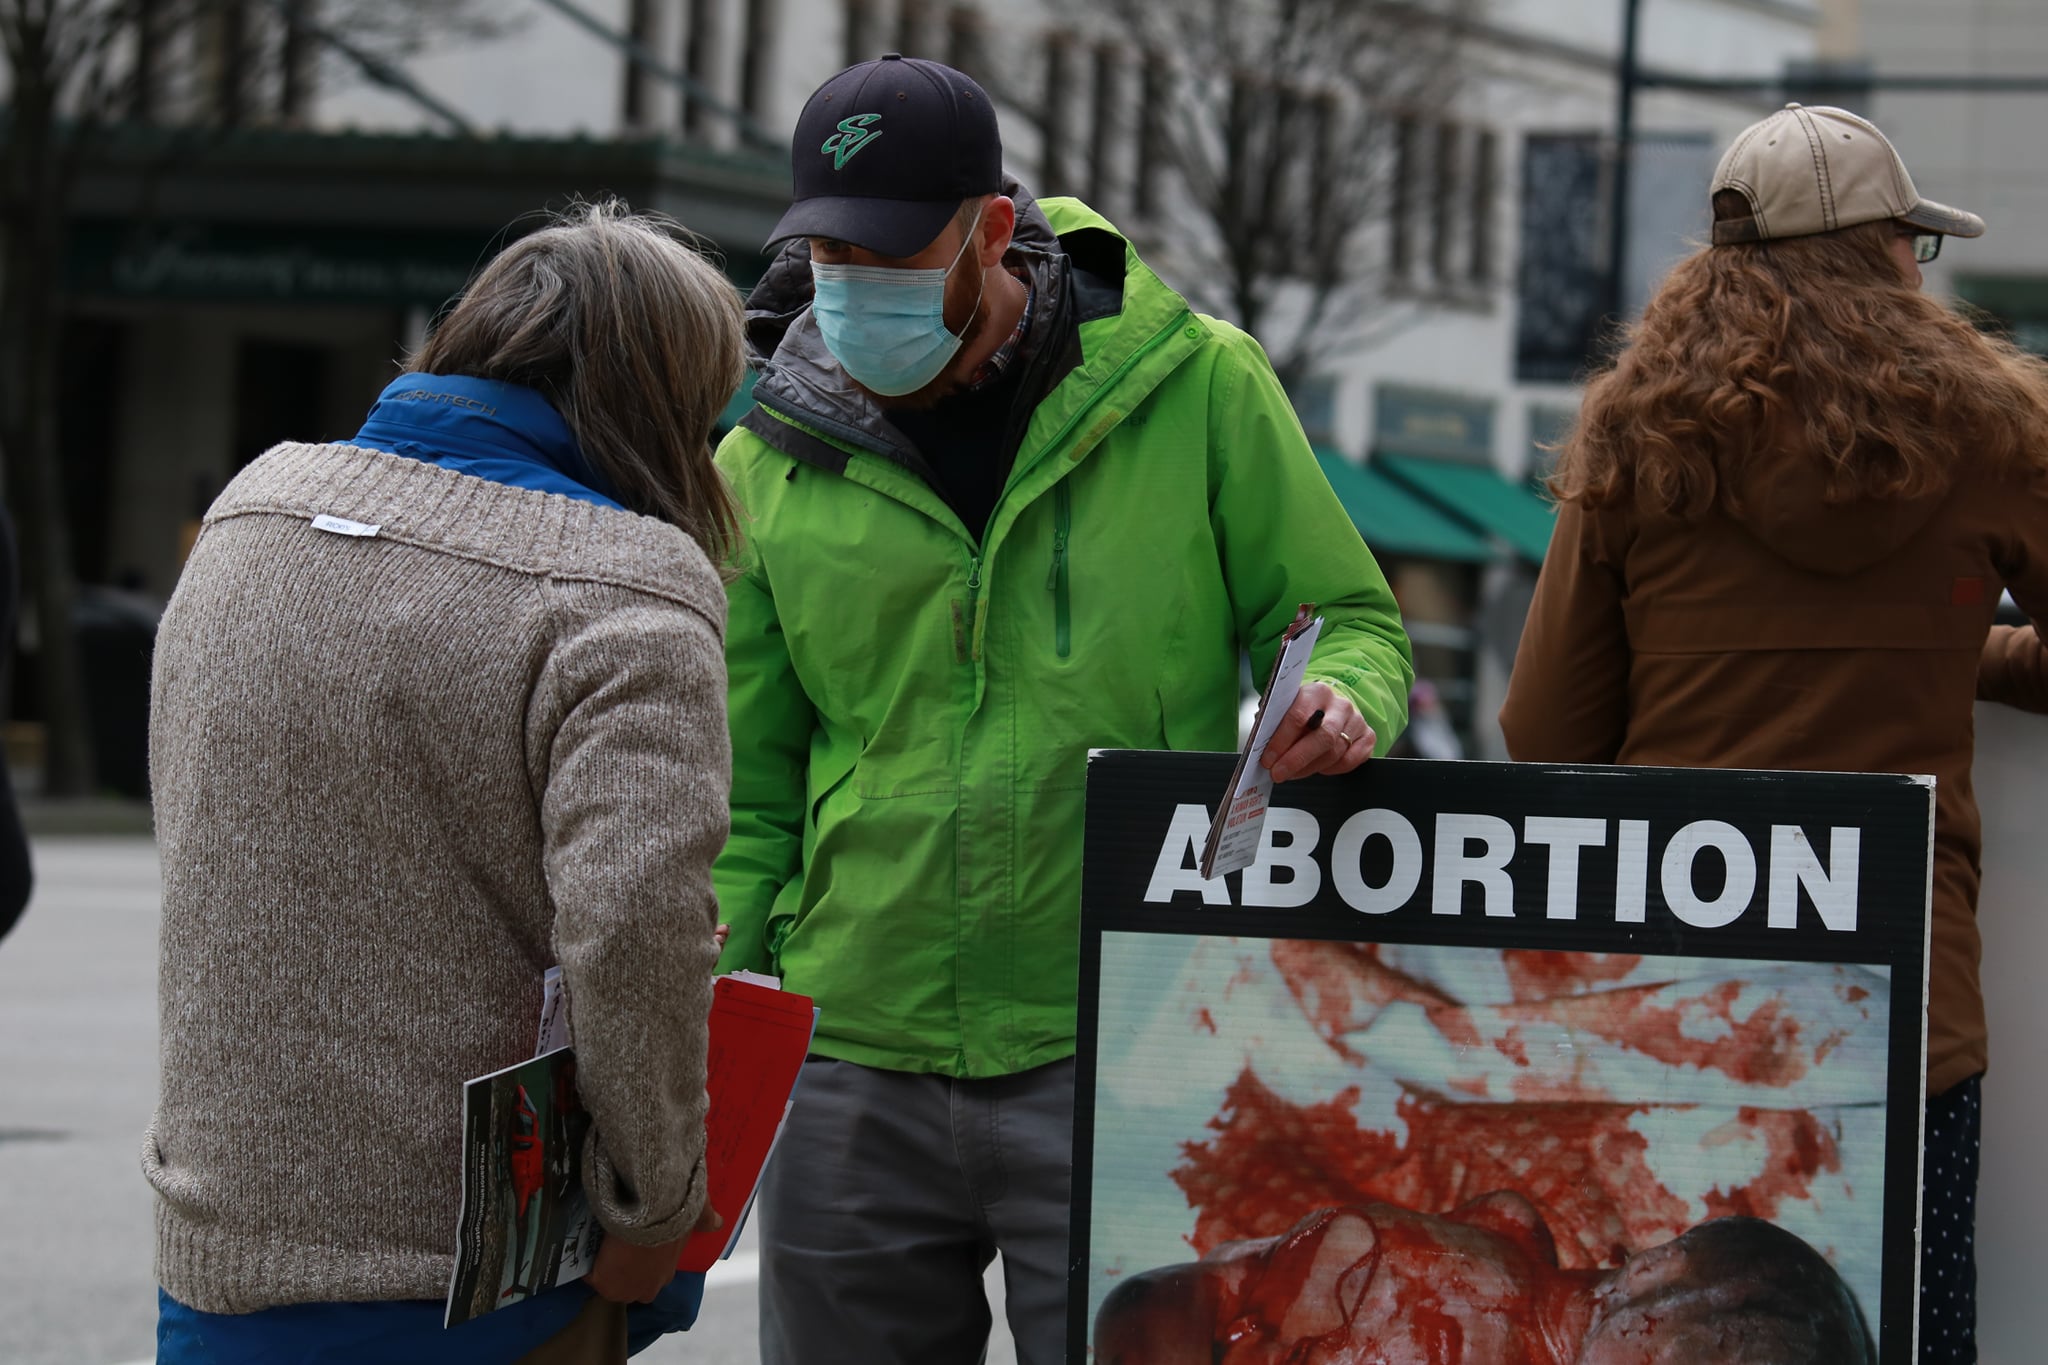 How can Canadian pro-lifers stay optimistic?